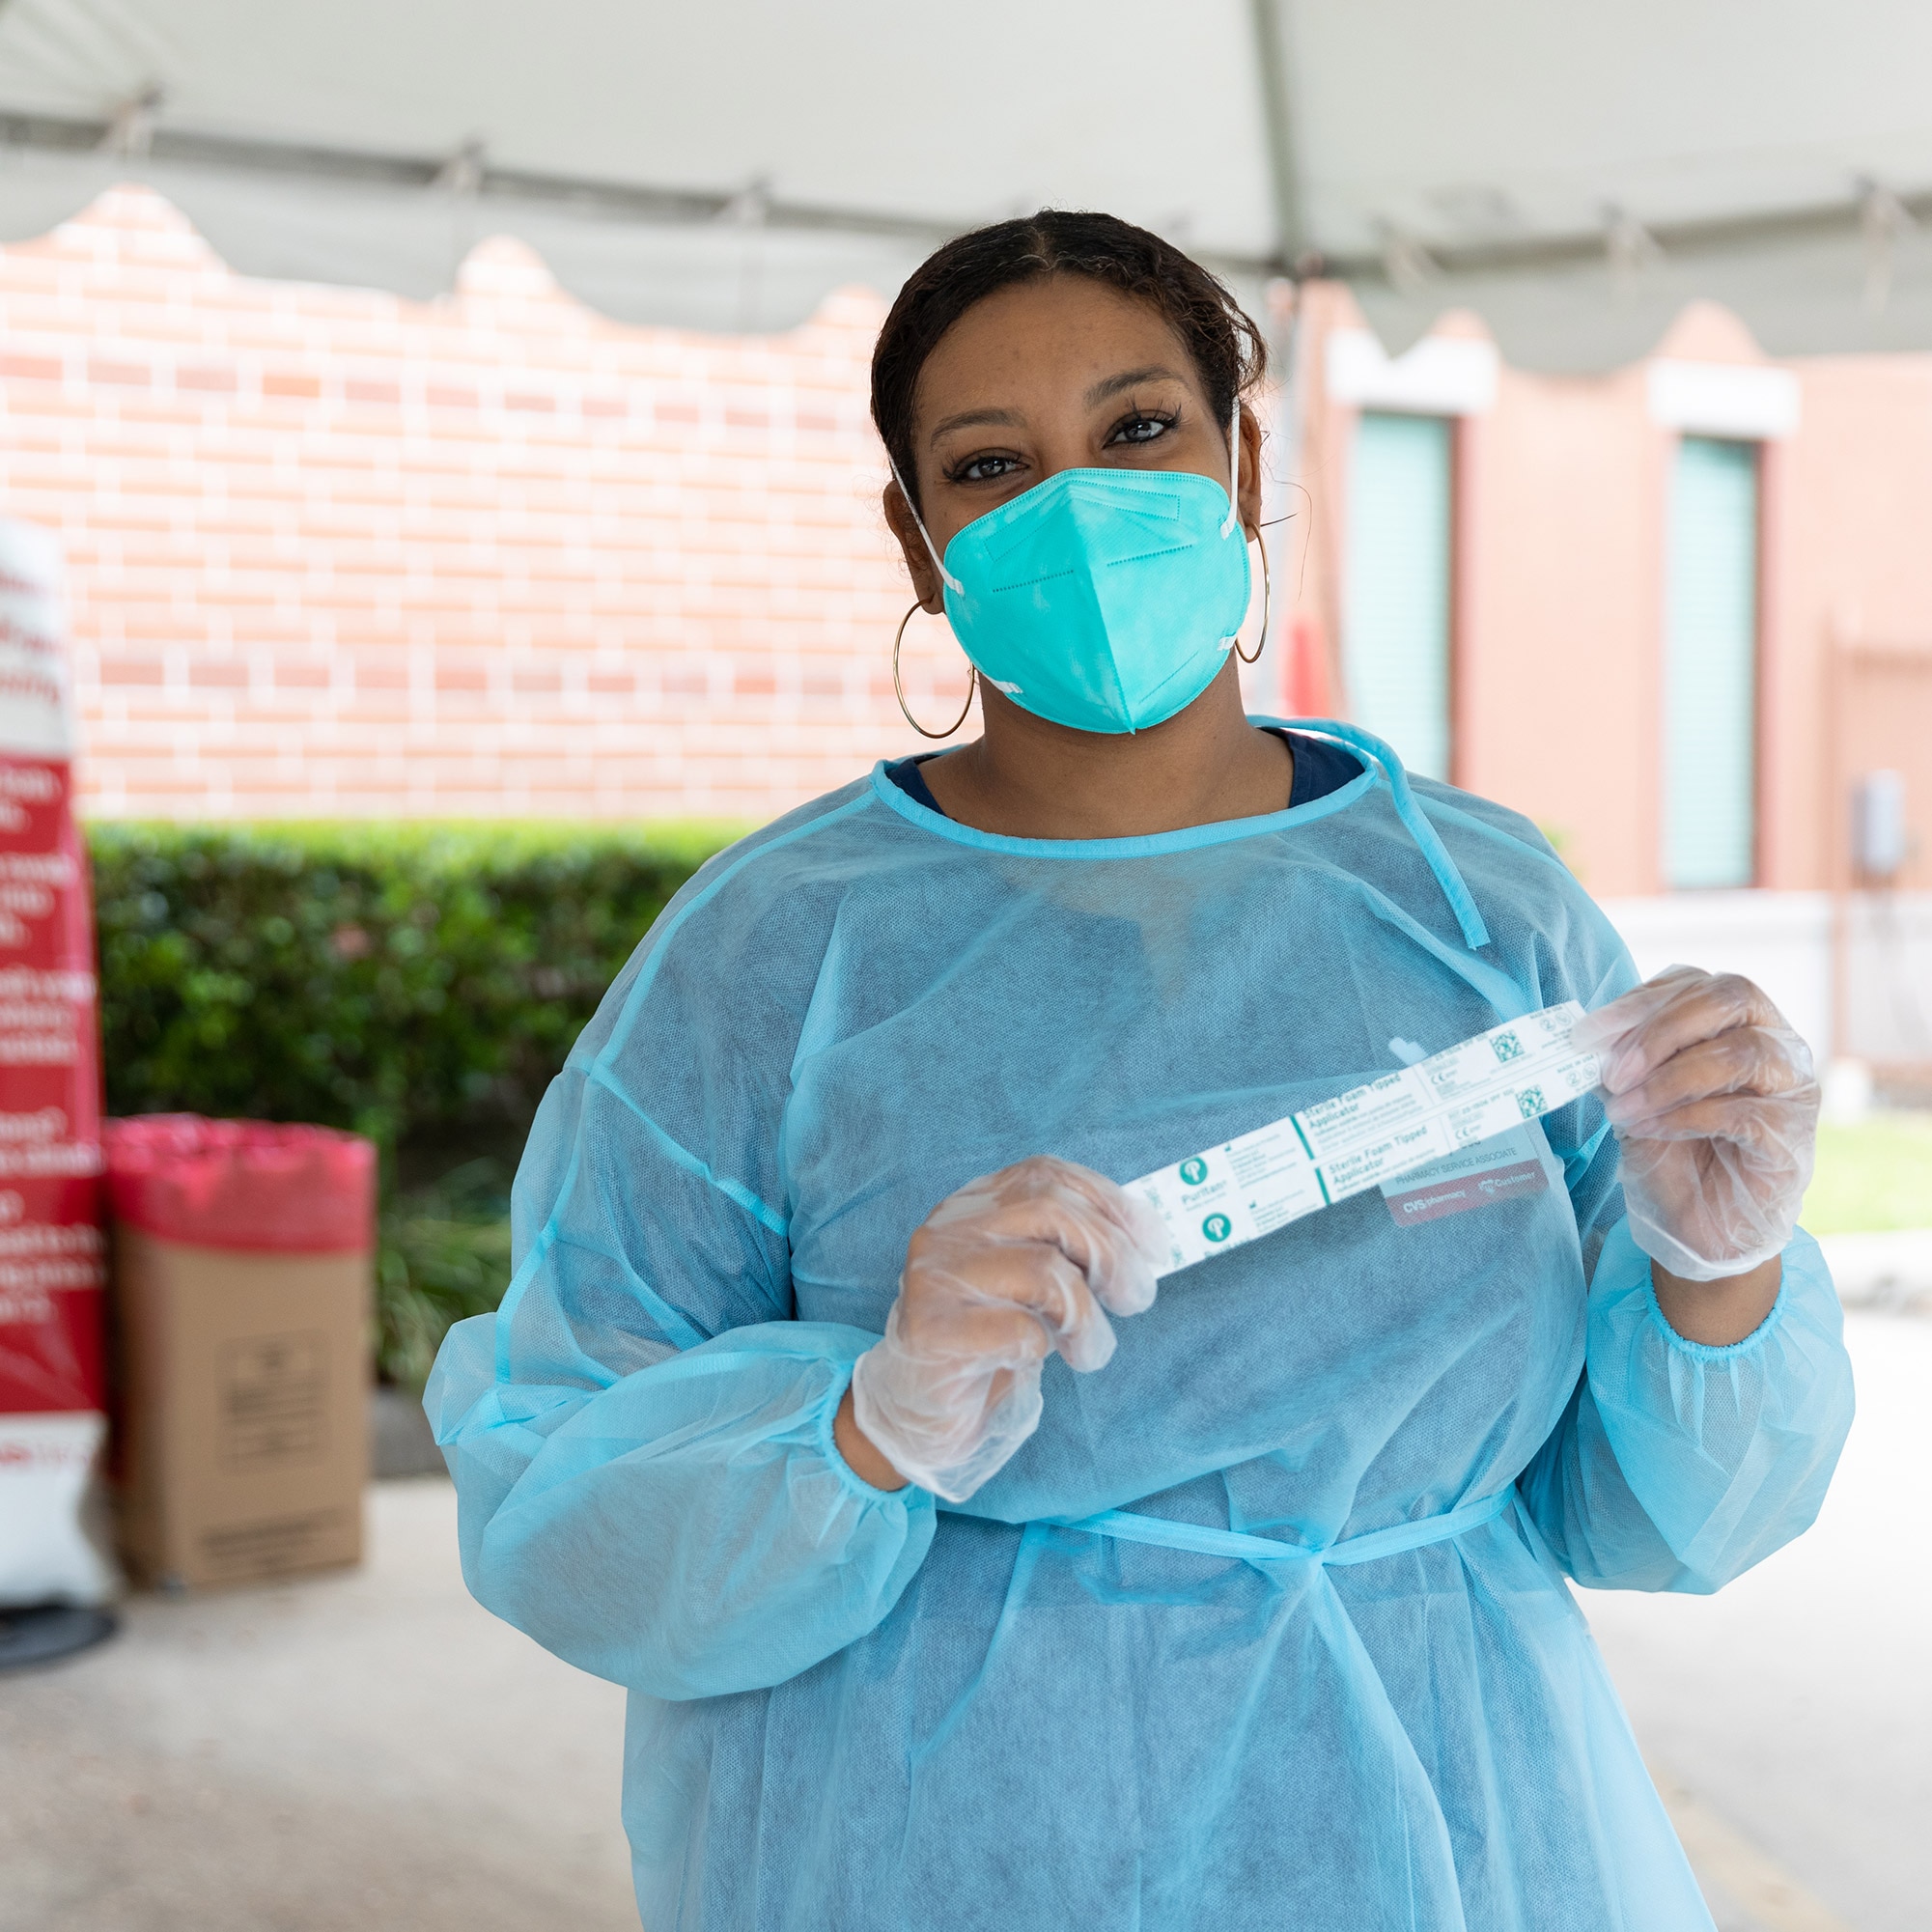 Alysses Goree standing at an outdoor CVS Health vaccination location.